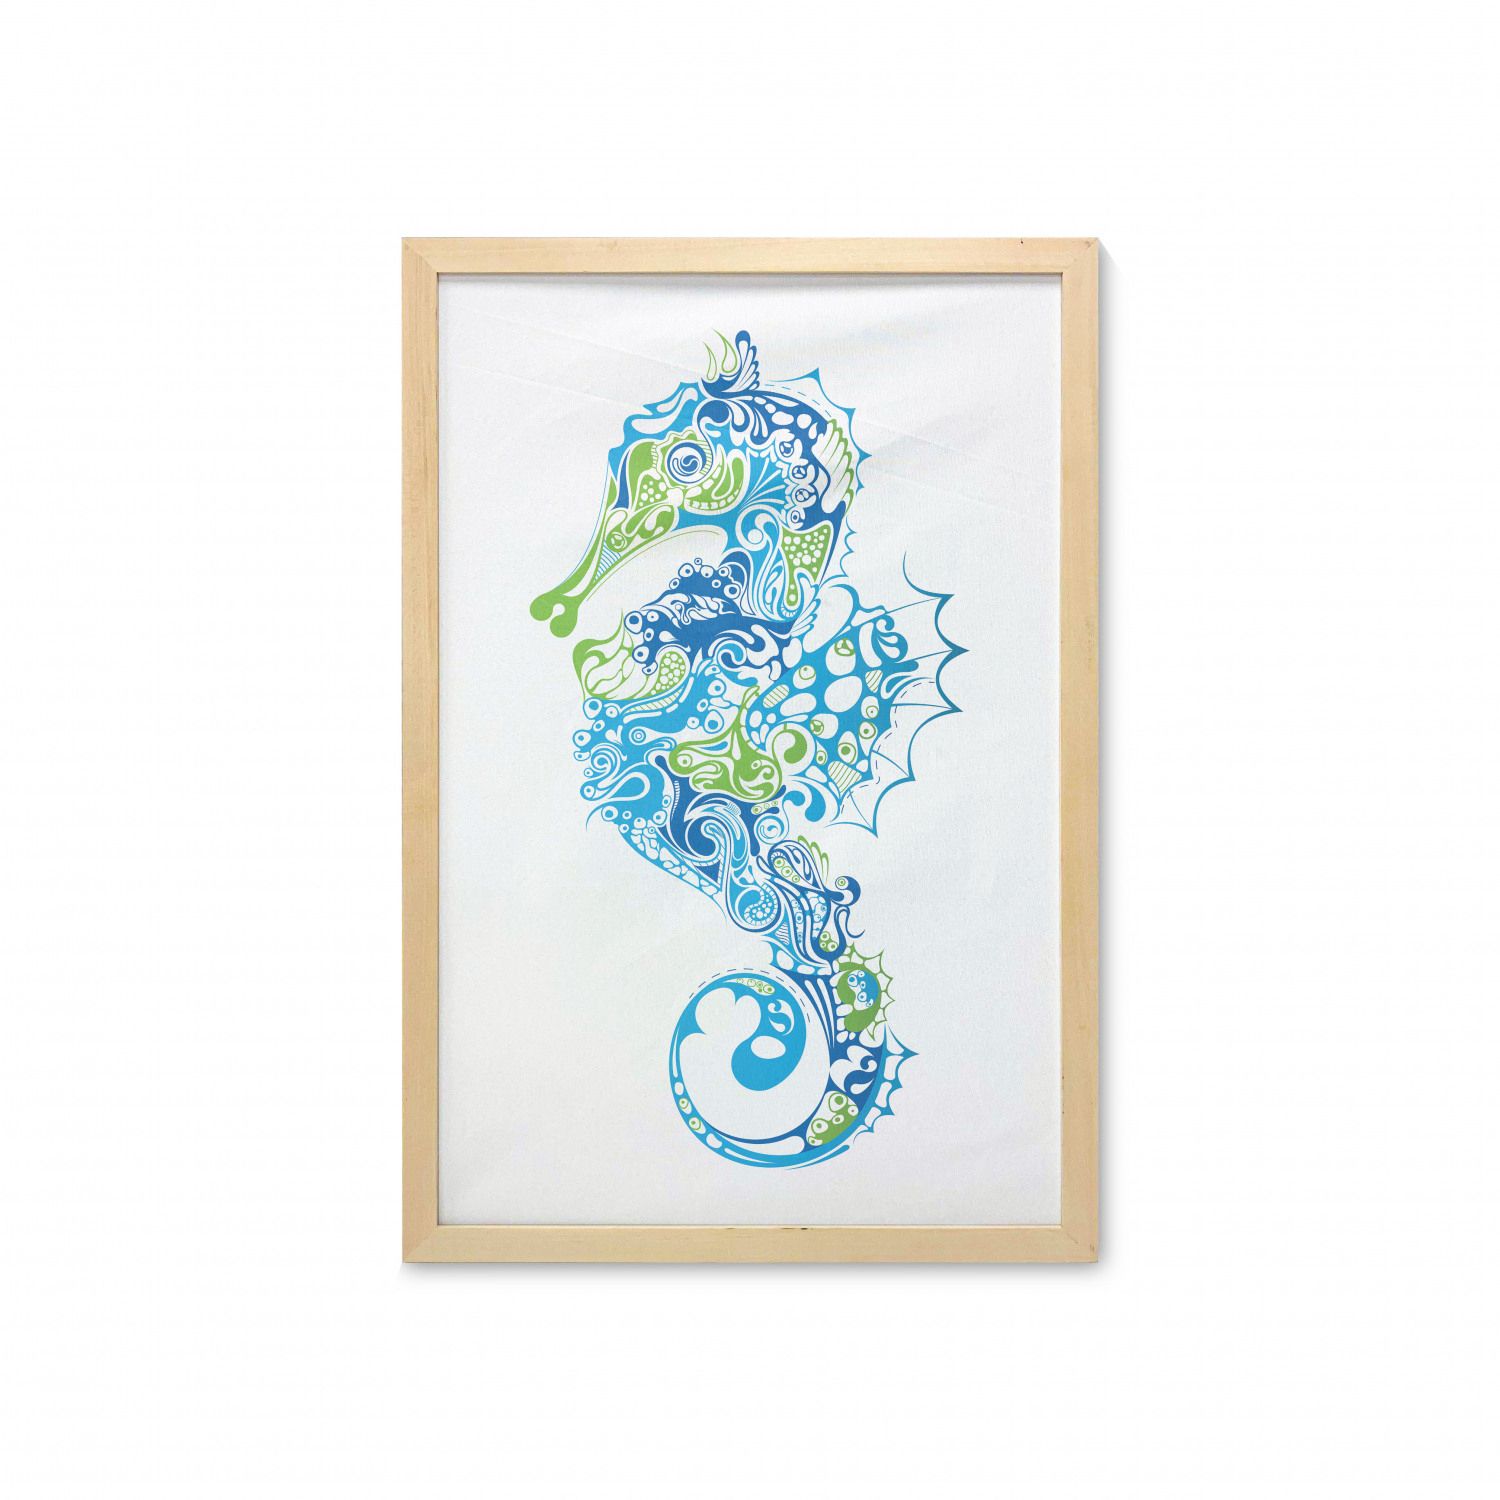 Seahorse Wall Art With Frame, Seahorse Design With Abstract Curvy And Wavy  Geometric Forms, Printed Fabric Poster For Bathroom Living Room Dorms, 23"  X 35", Lime Green Night Blue,ambesonne – Intended For Seahorse Wall Art (View 9 of 15)